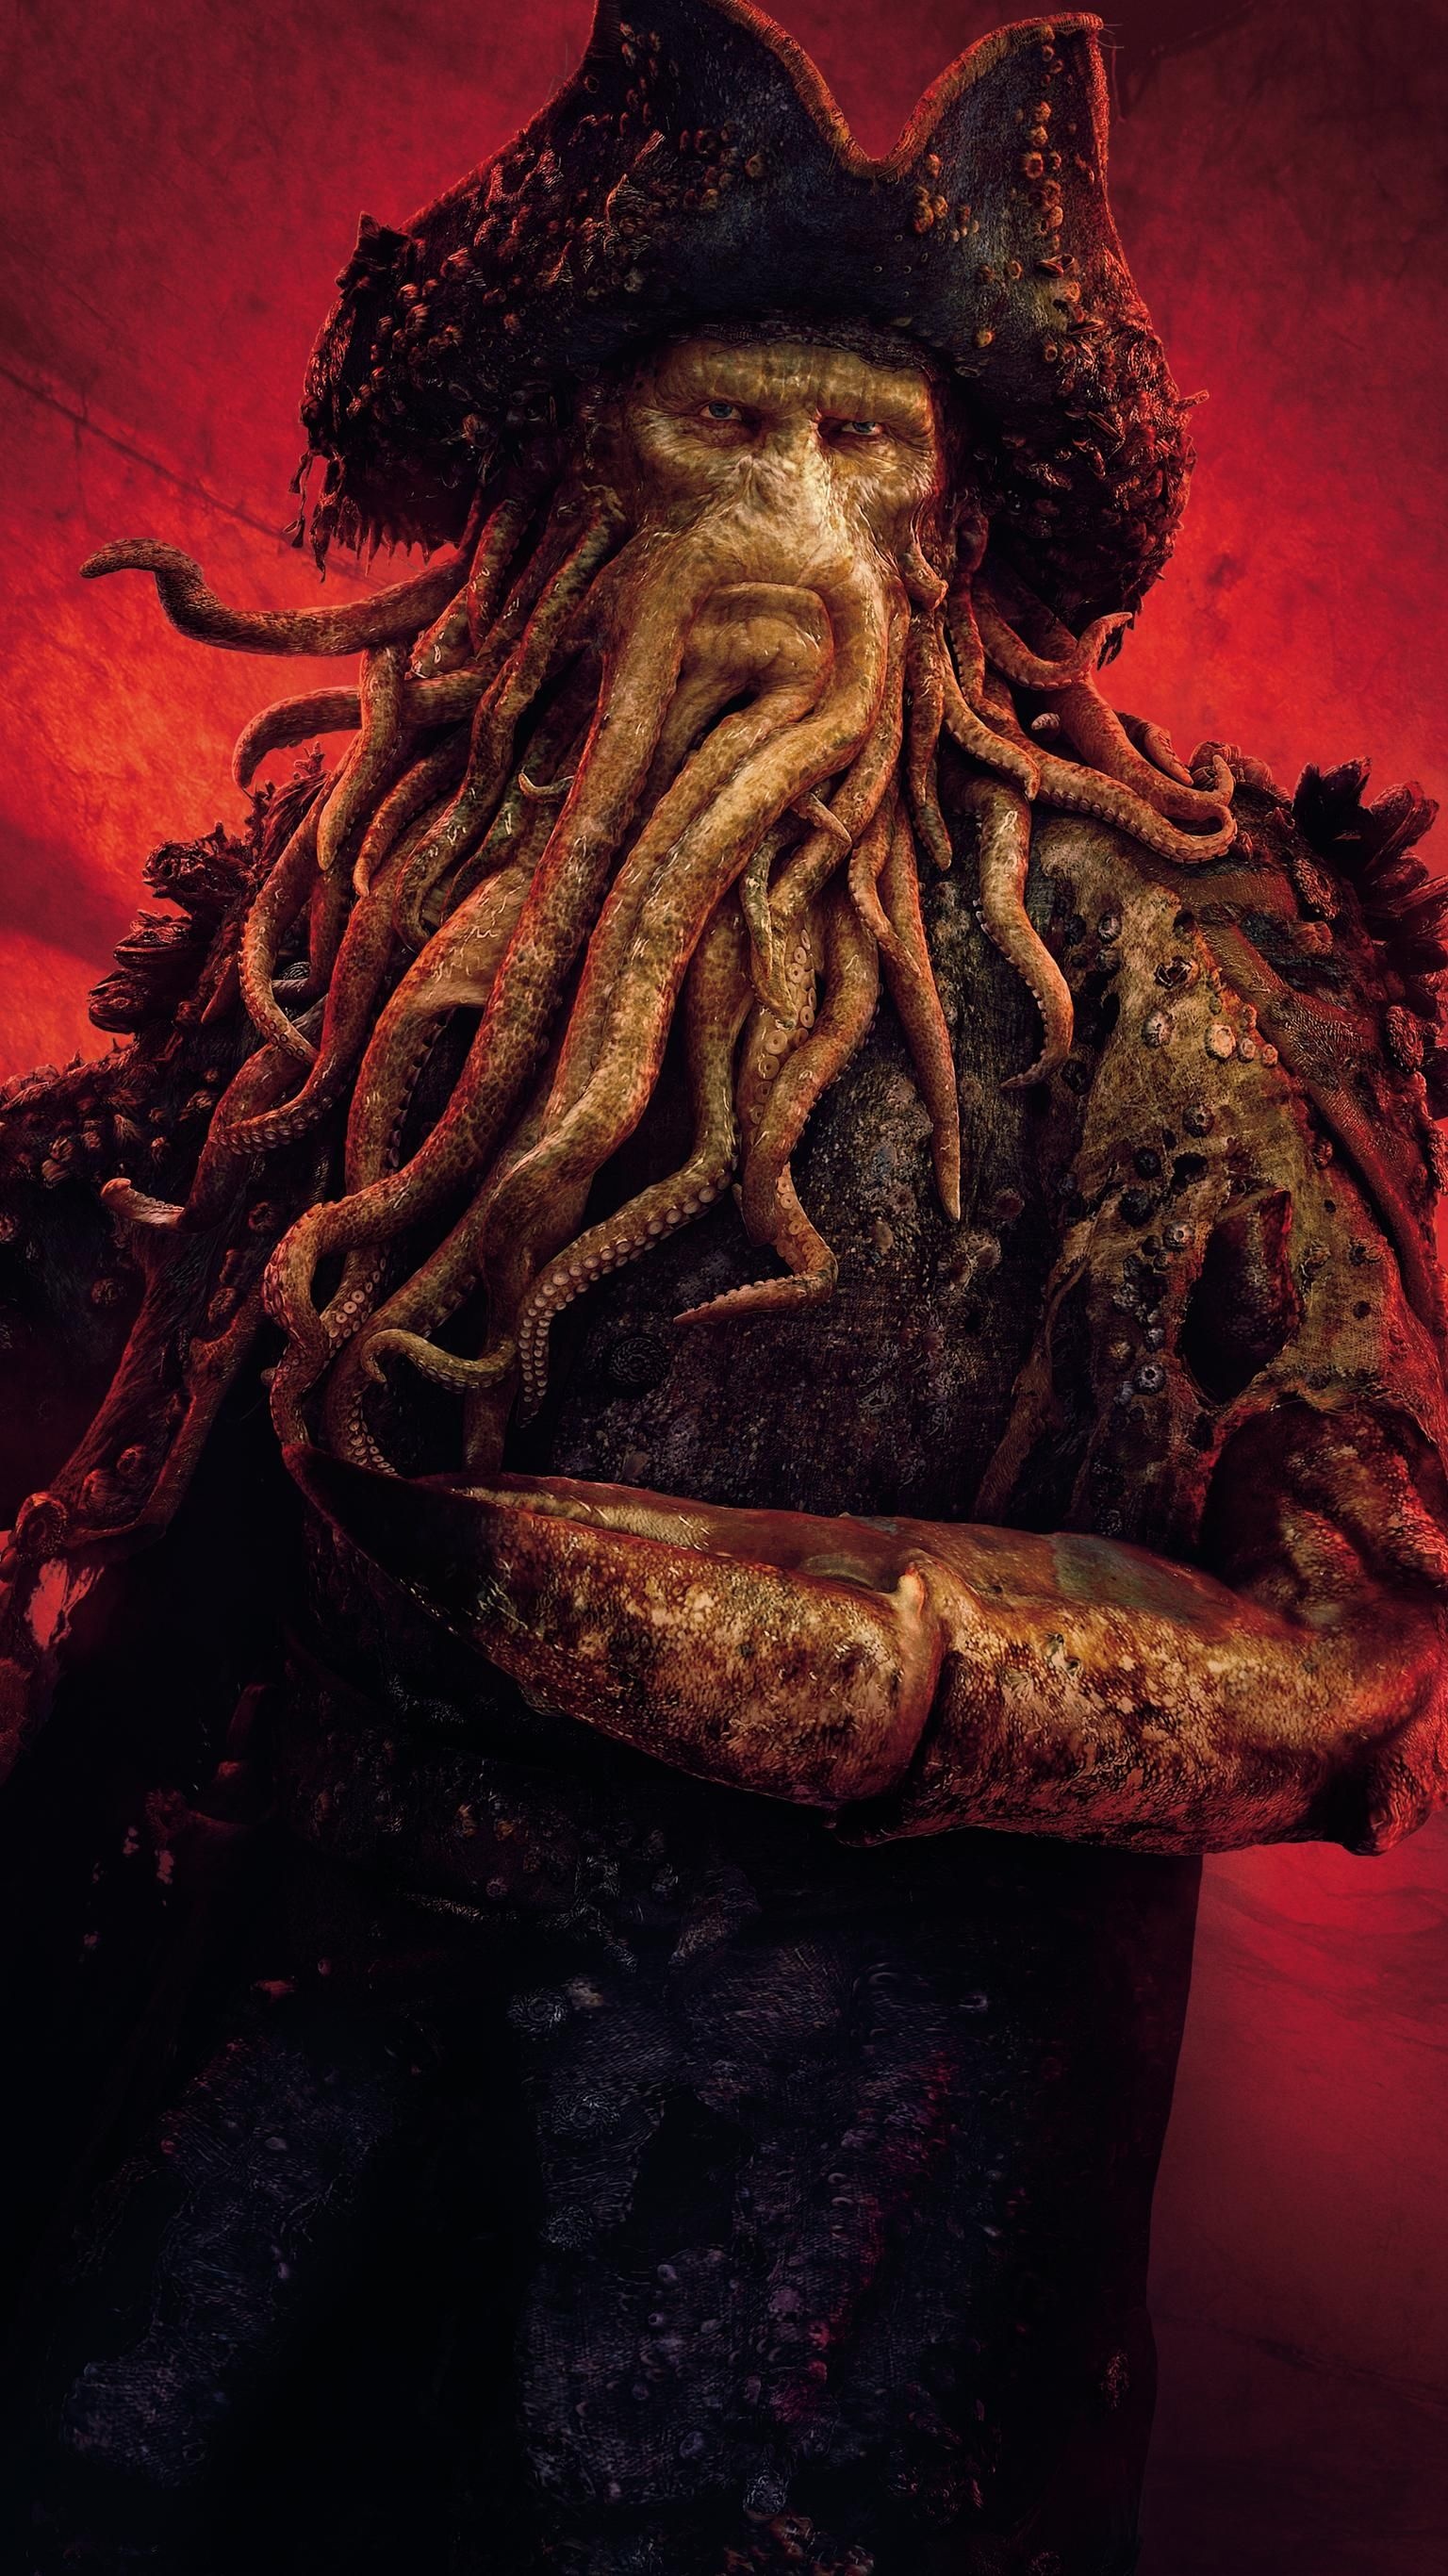 Pirates of the Caribbean, World's End, Phone wallpaper, Movie mania, 1540x2740 HD Phone